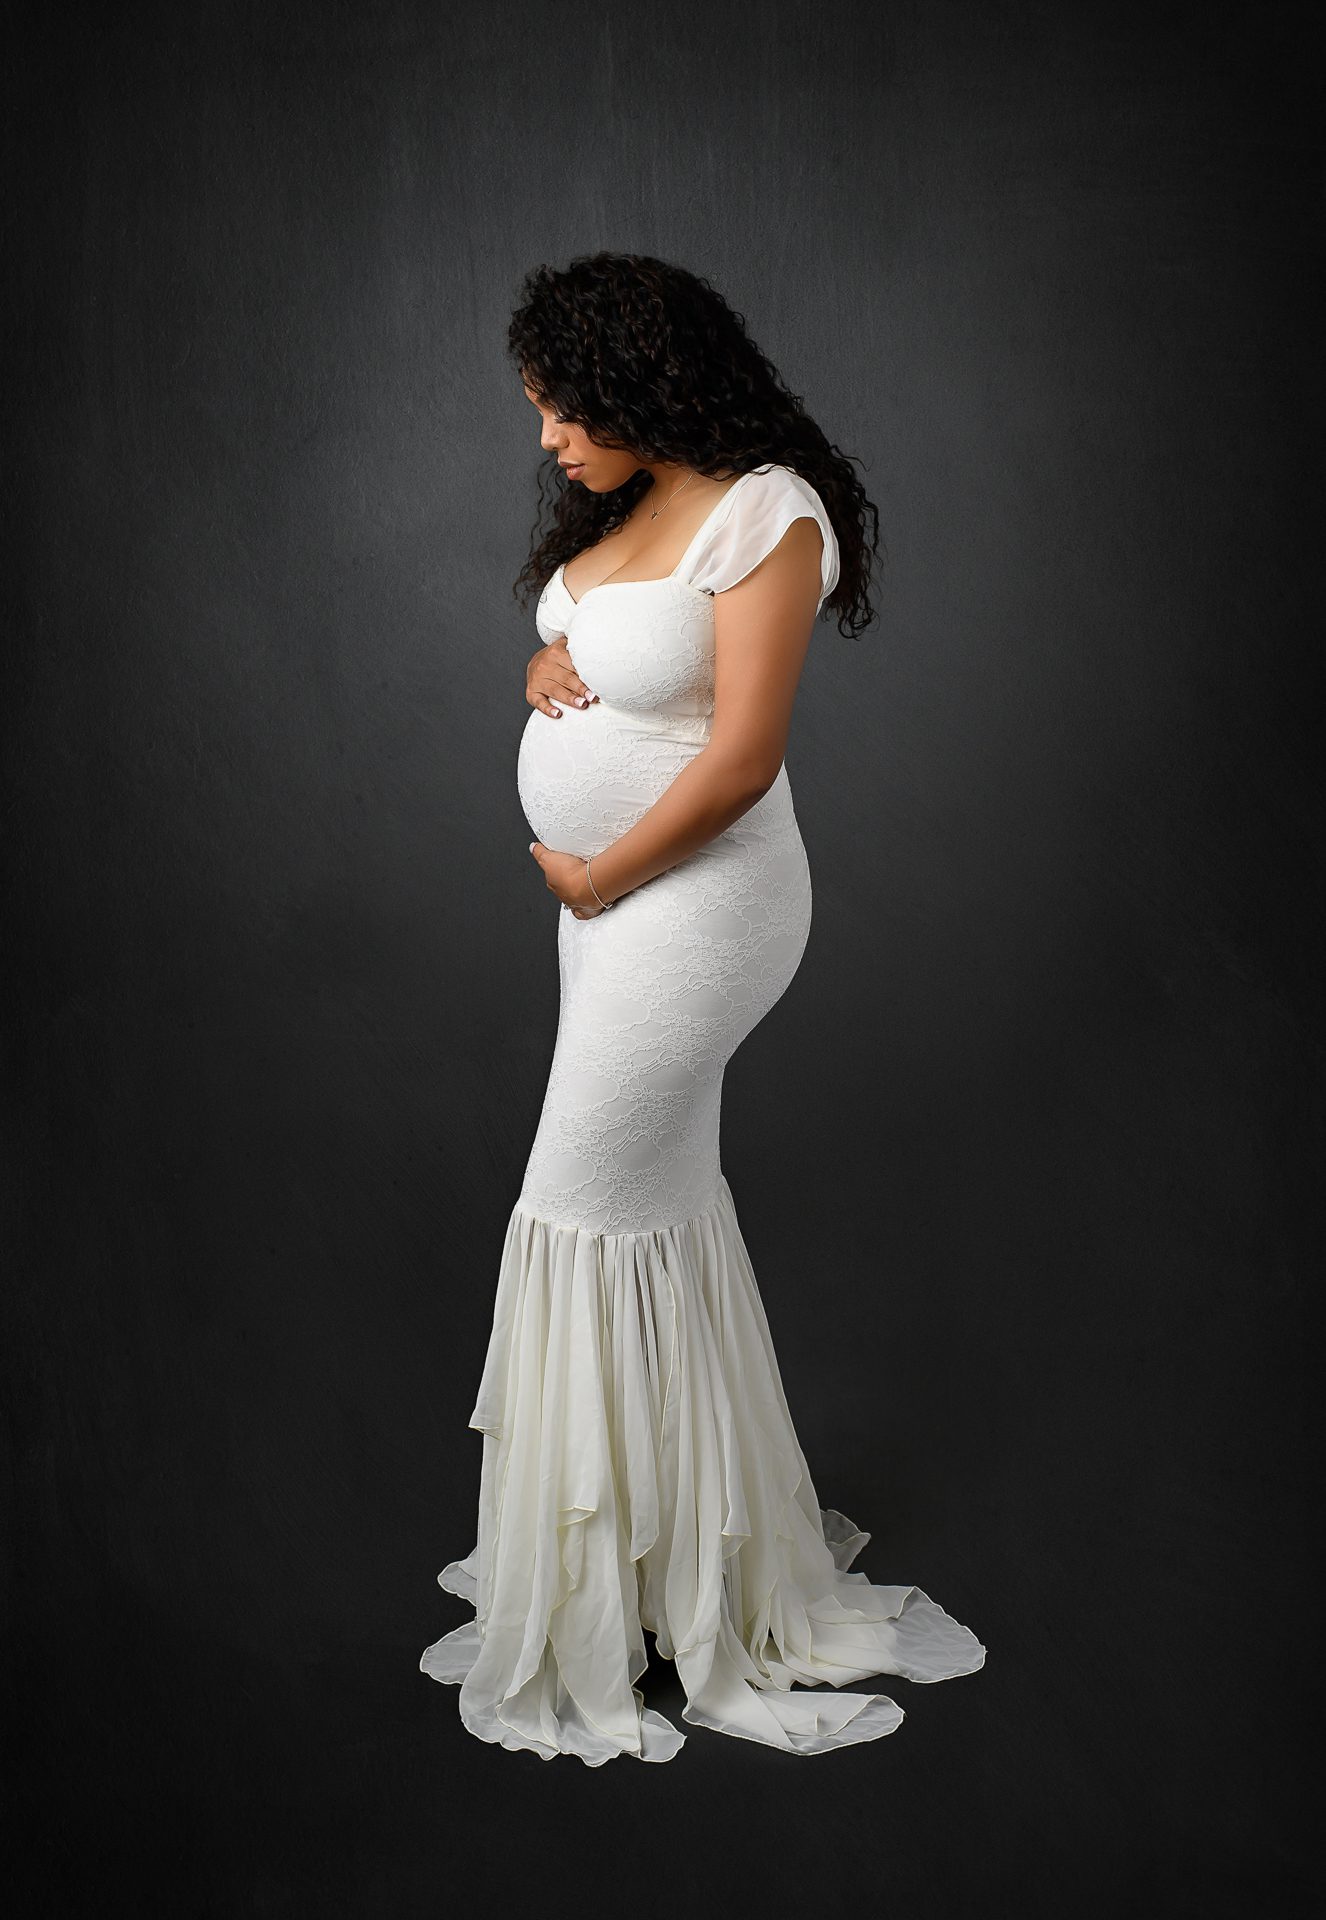 A mother to be posing for maternity photography - Natalie Roberson Photography